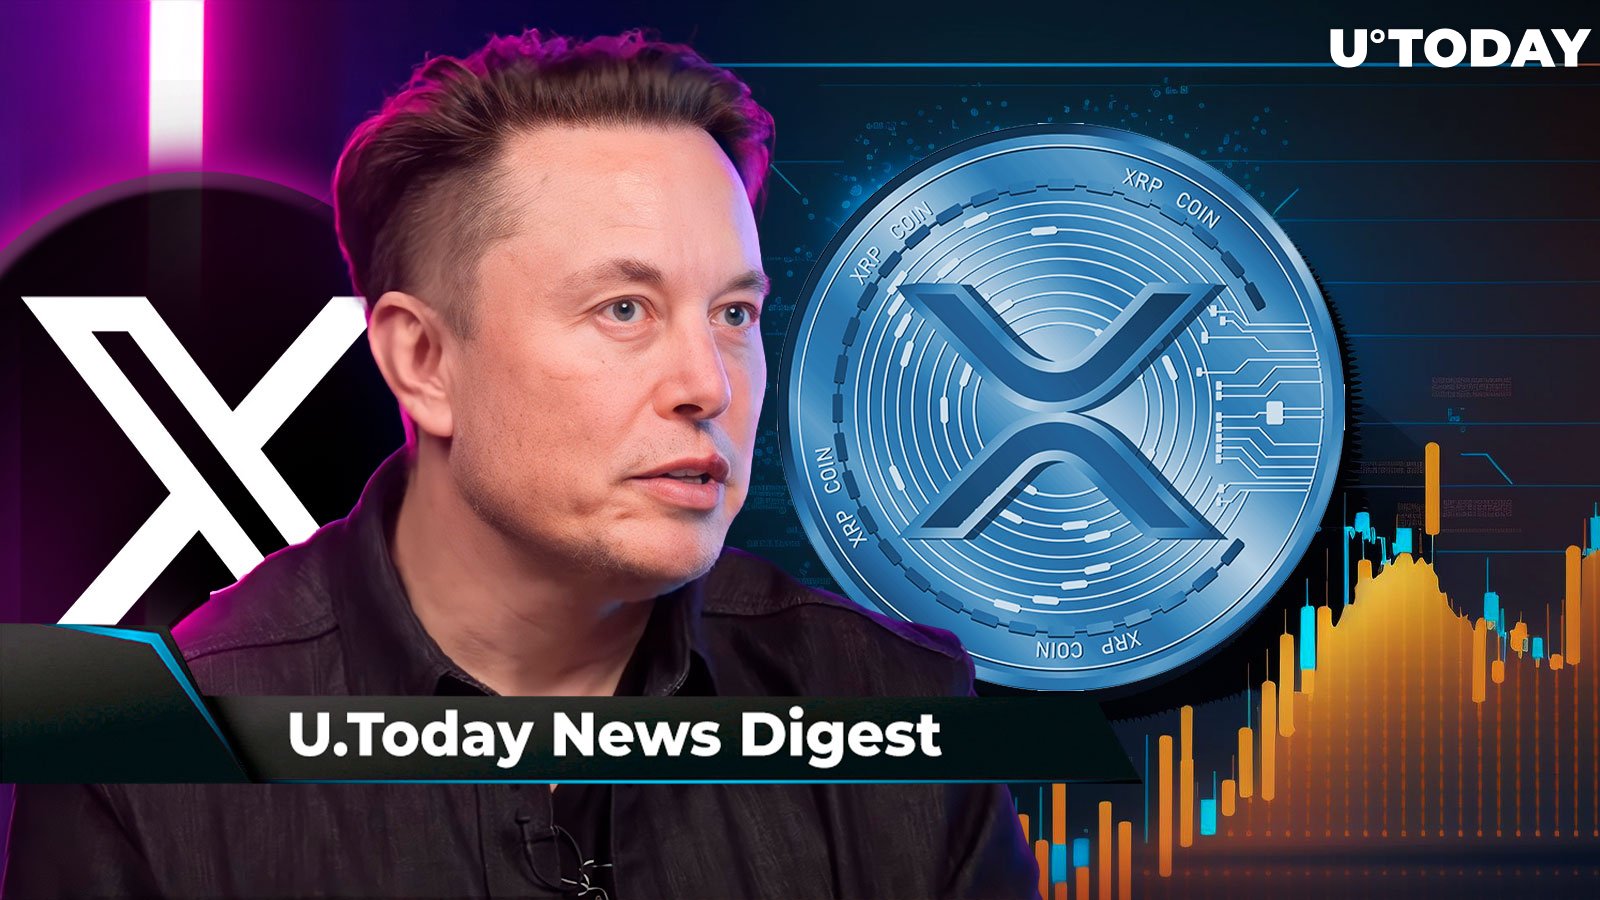 XRP 12% Reversal More Than Possible, Elon Musk Says 'X' Will Never Launch Native Token, SHIB Lead Shytoshi Kusama Shuts Down Scammers: Crypto News Digest by U.Today